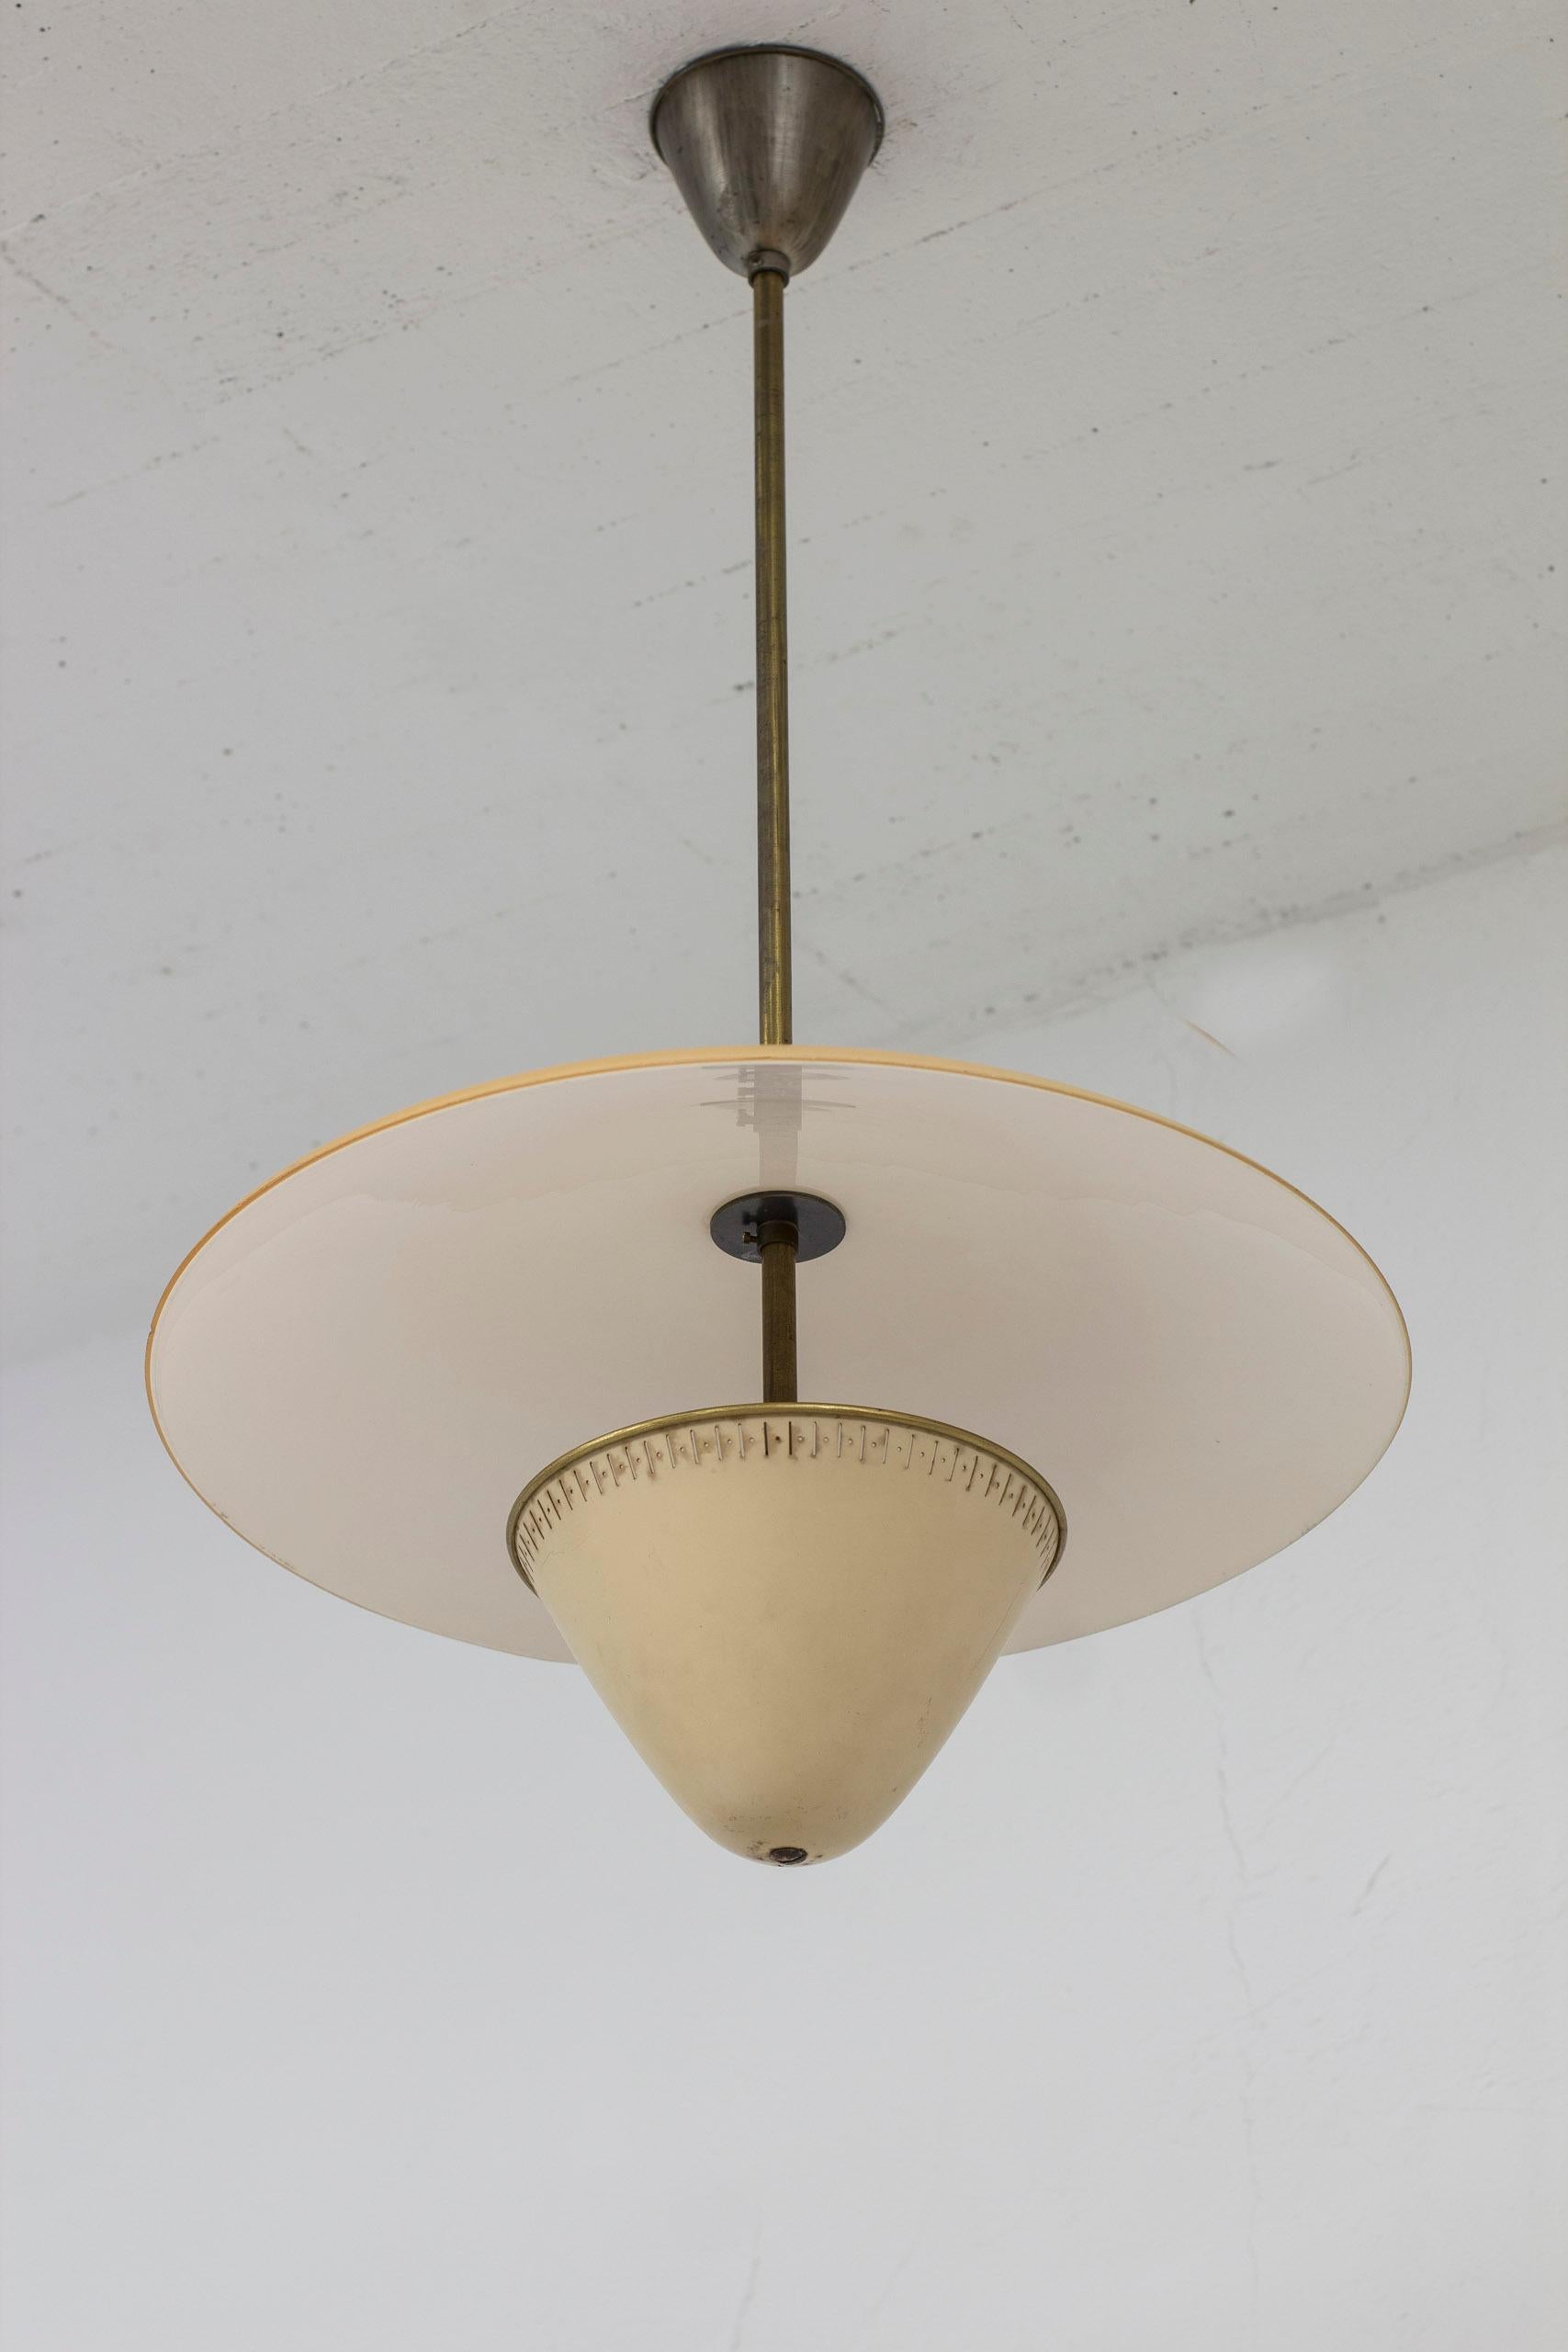 Ceiling lamp produced by ASEA belysning during the 1930s. Brass, ivory colored paint and amber colored glass diffuser. Ceiling canopy in aluminum. Good vintage condition with age related wear and patina. Very minor chip on the edge of the glass